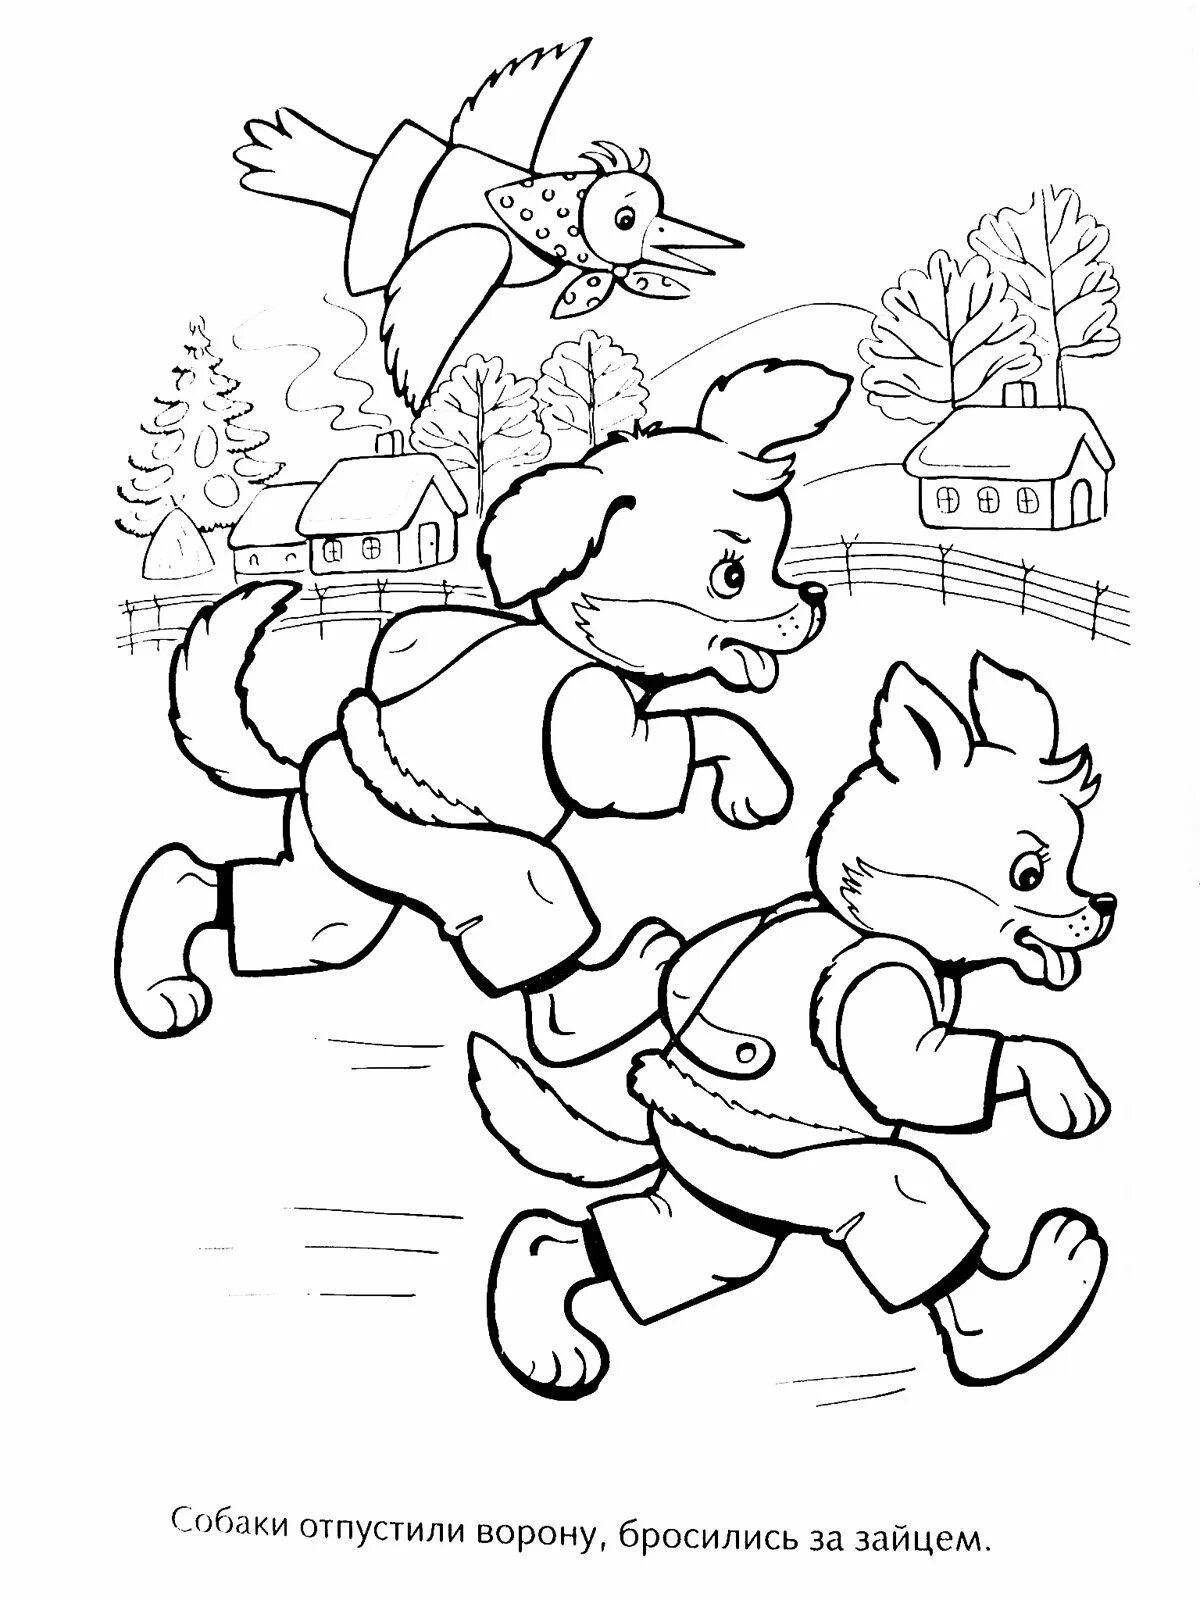 Coloring page charming hare hut